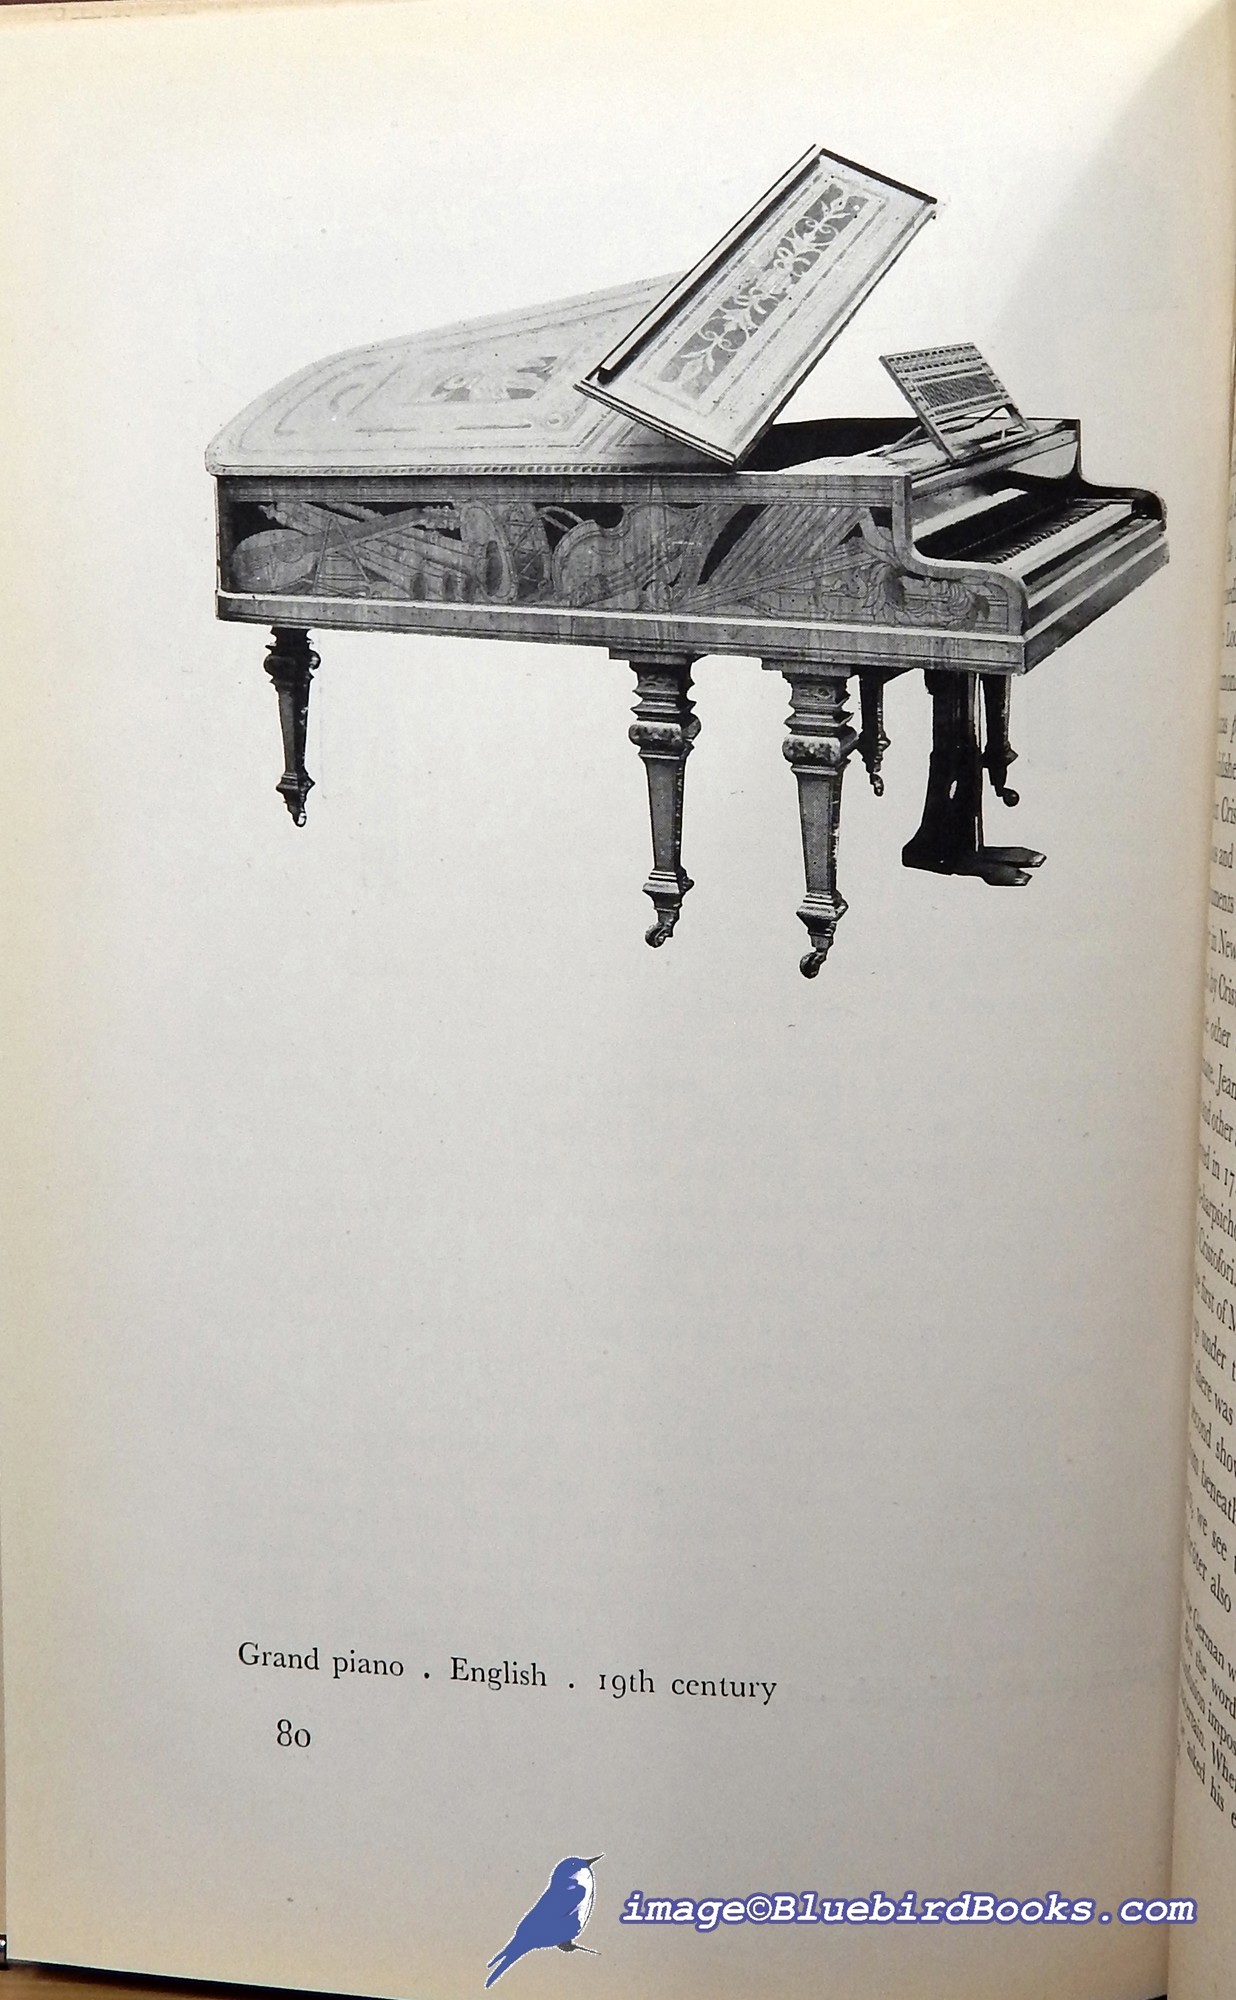 CLOSSON, ERNEST - History of the Piano